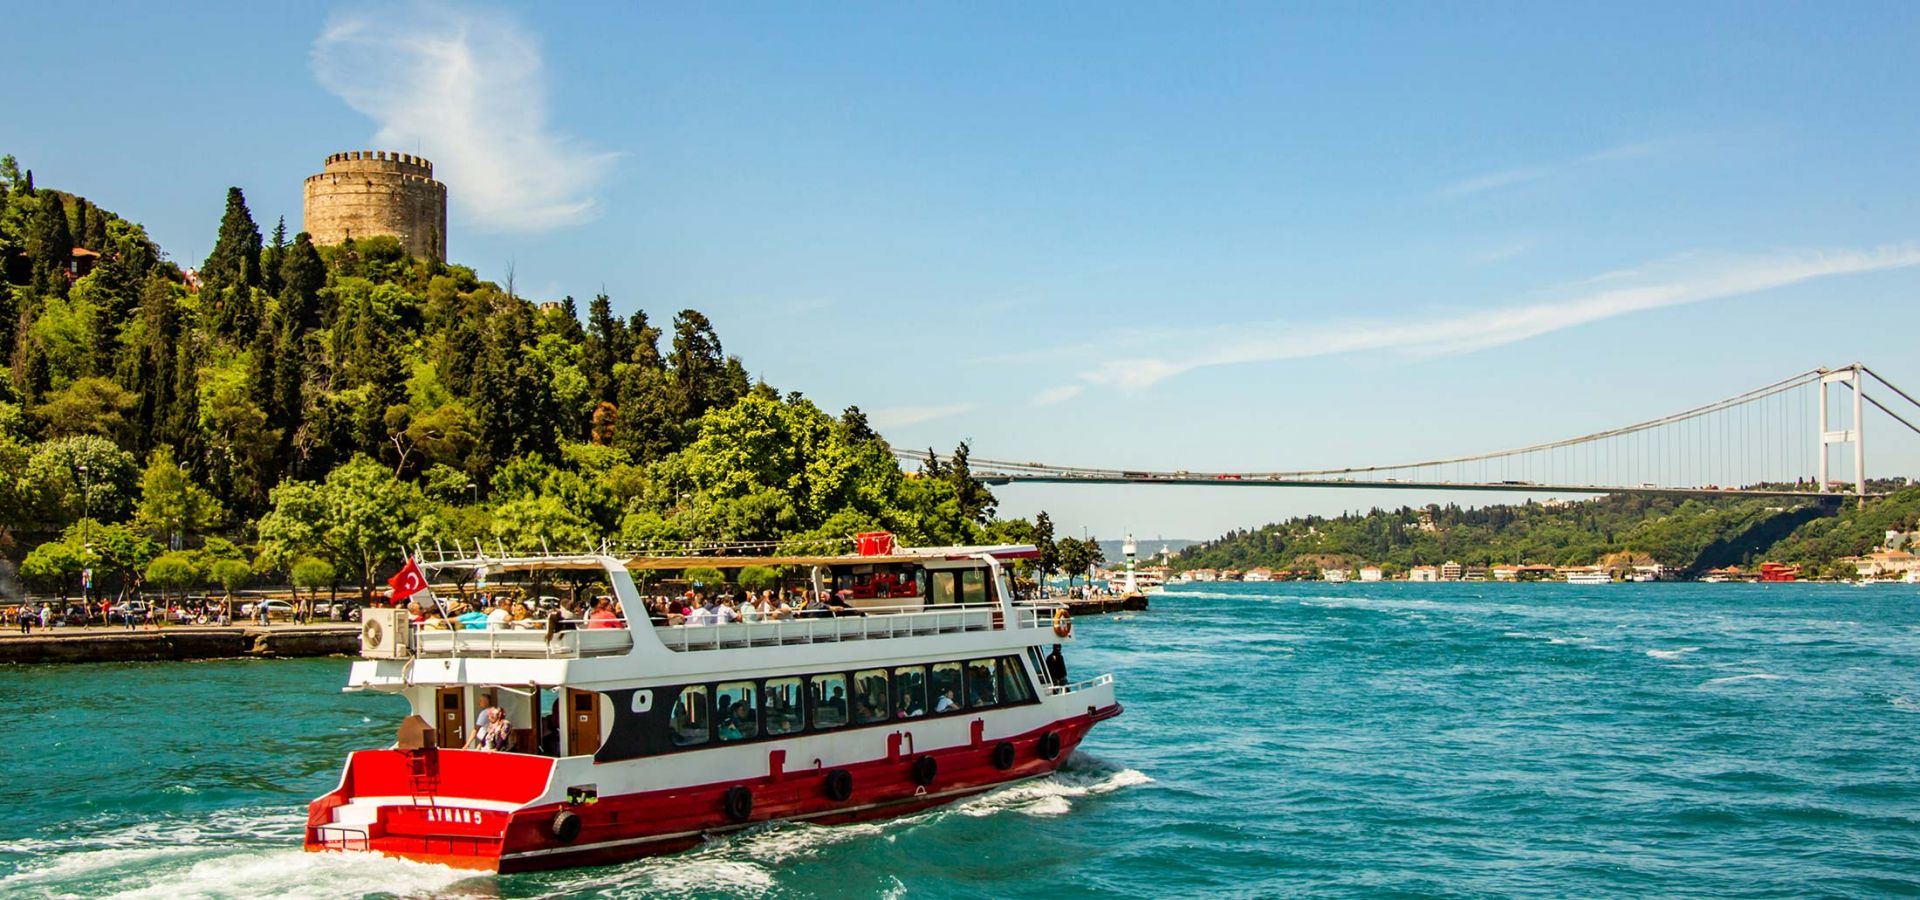 Daily Bosphorus Cruise Tour FullDay Trip in Istanbul